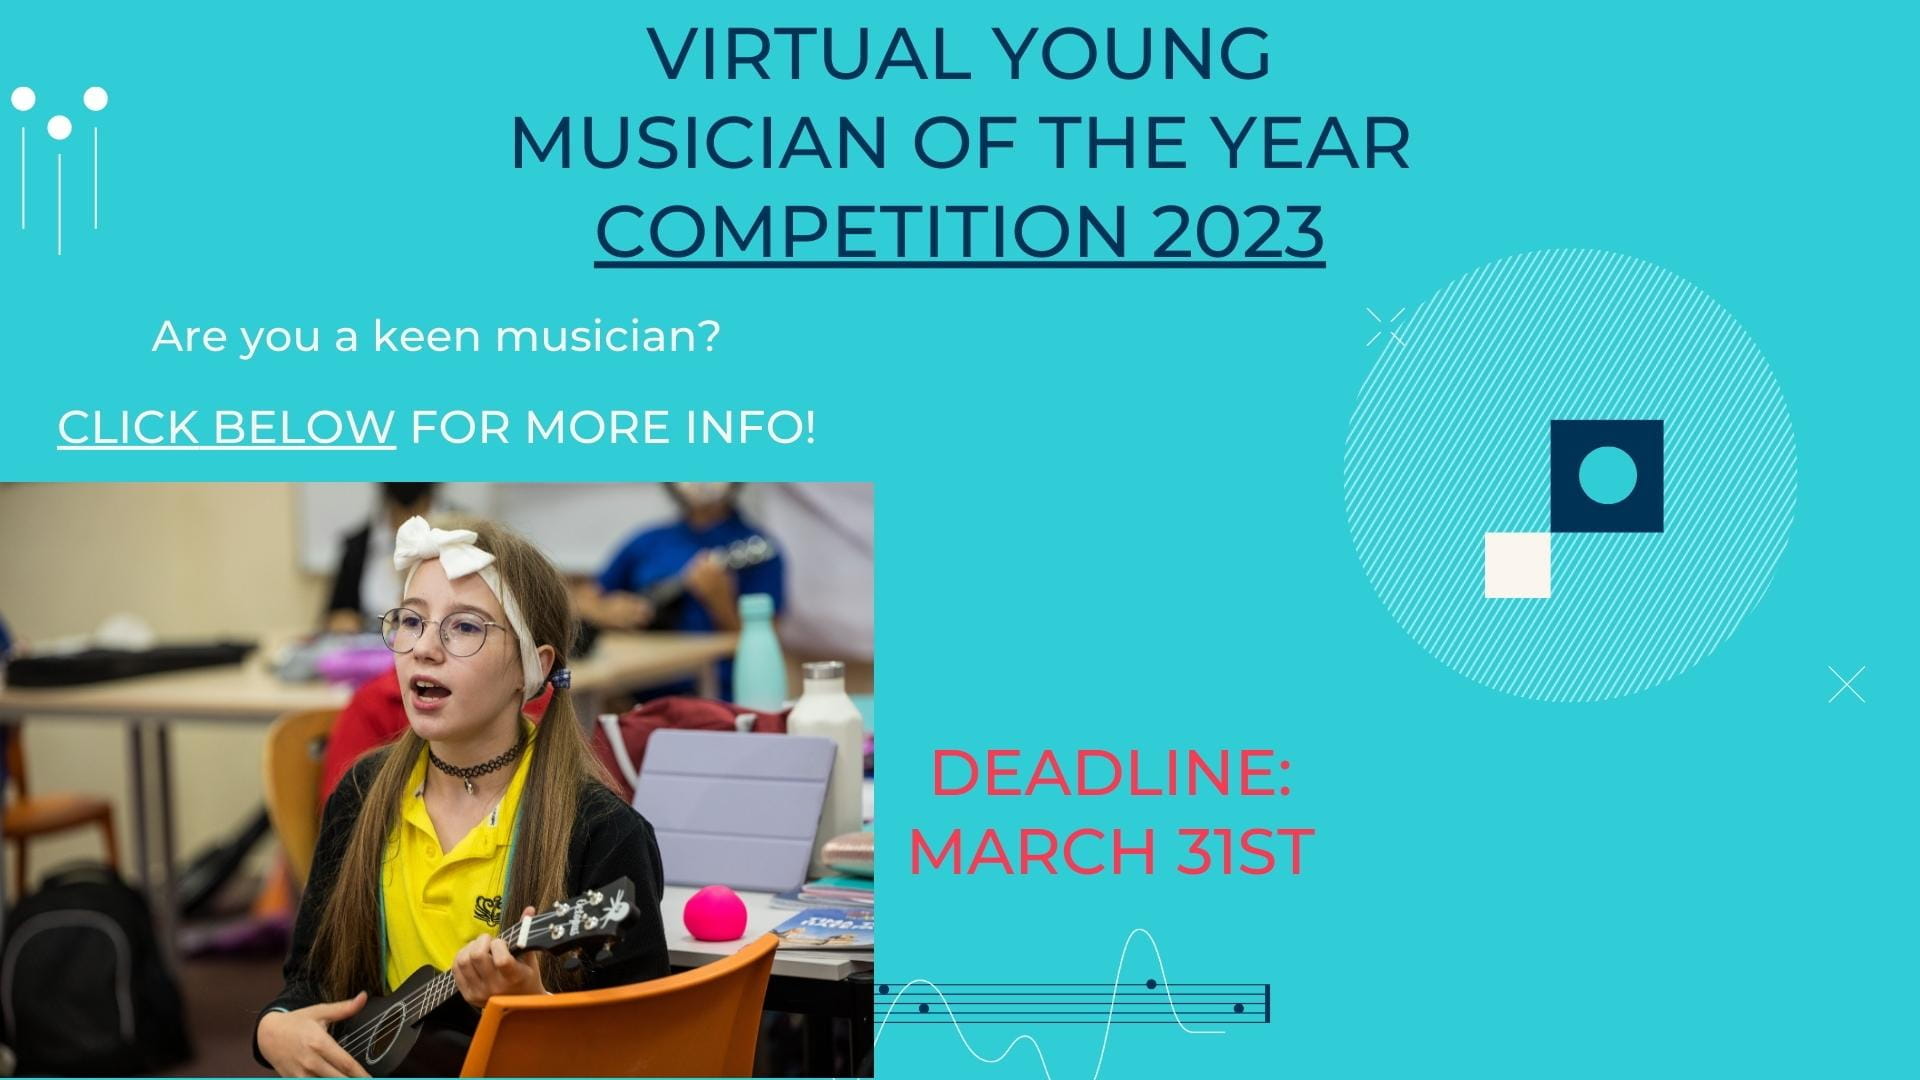 Virtual Young Musician of the Year Competition - Virtual Young Musician of the Year Competition